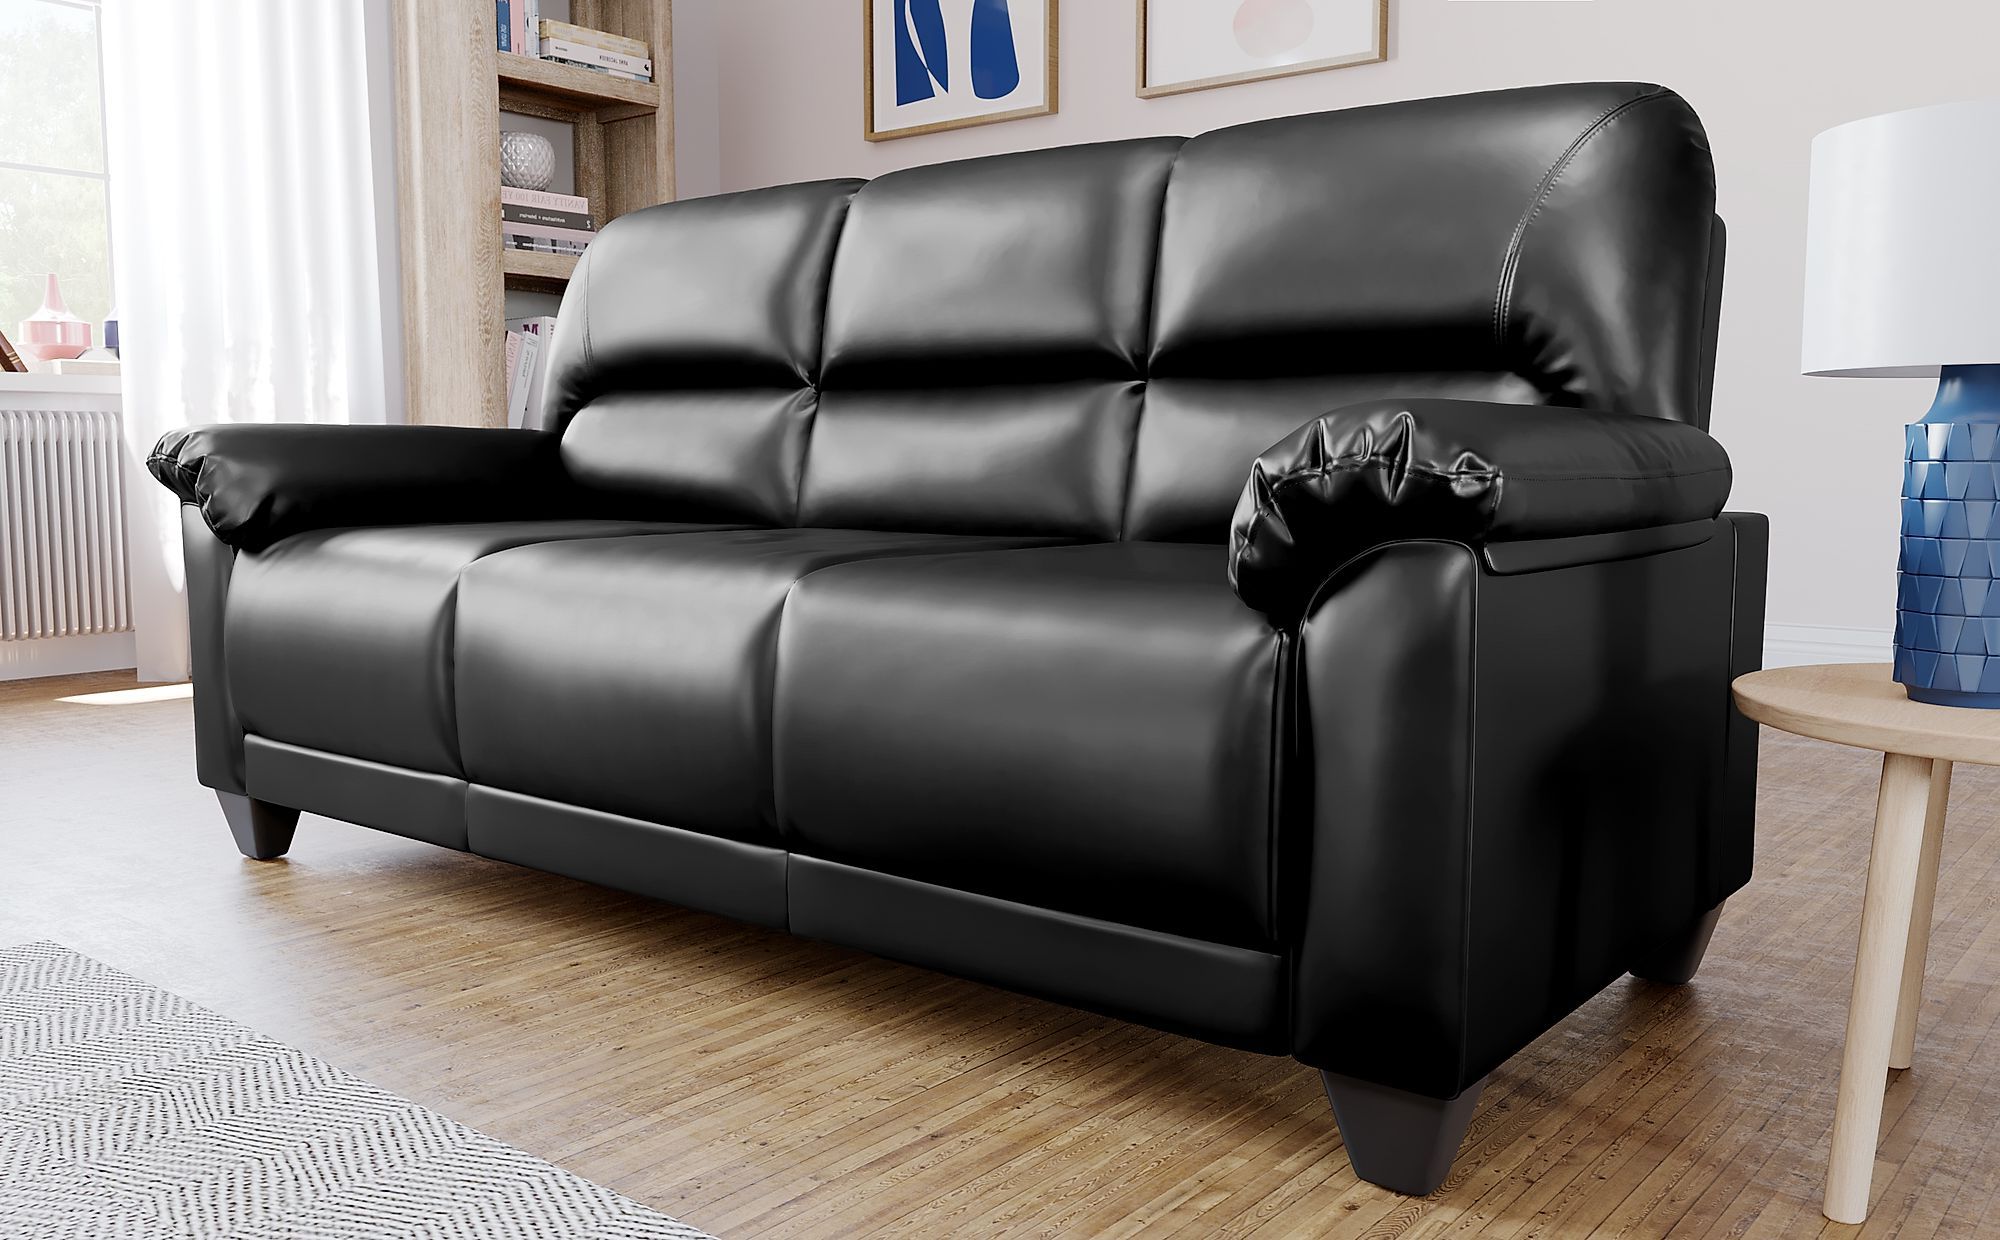 Furniture Choice Within Well Known Sofas In Black (View 15 of 15)